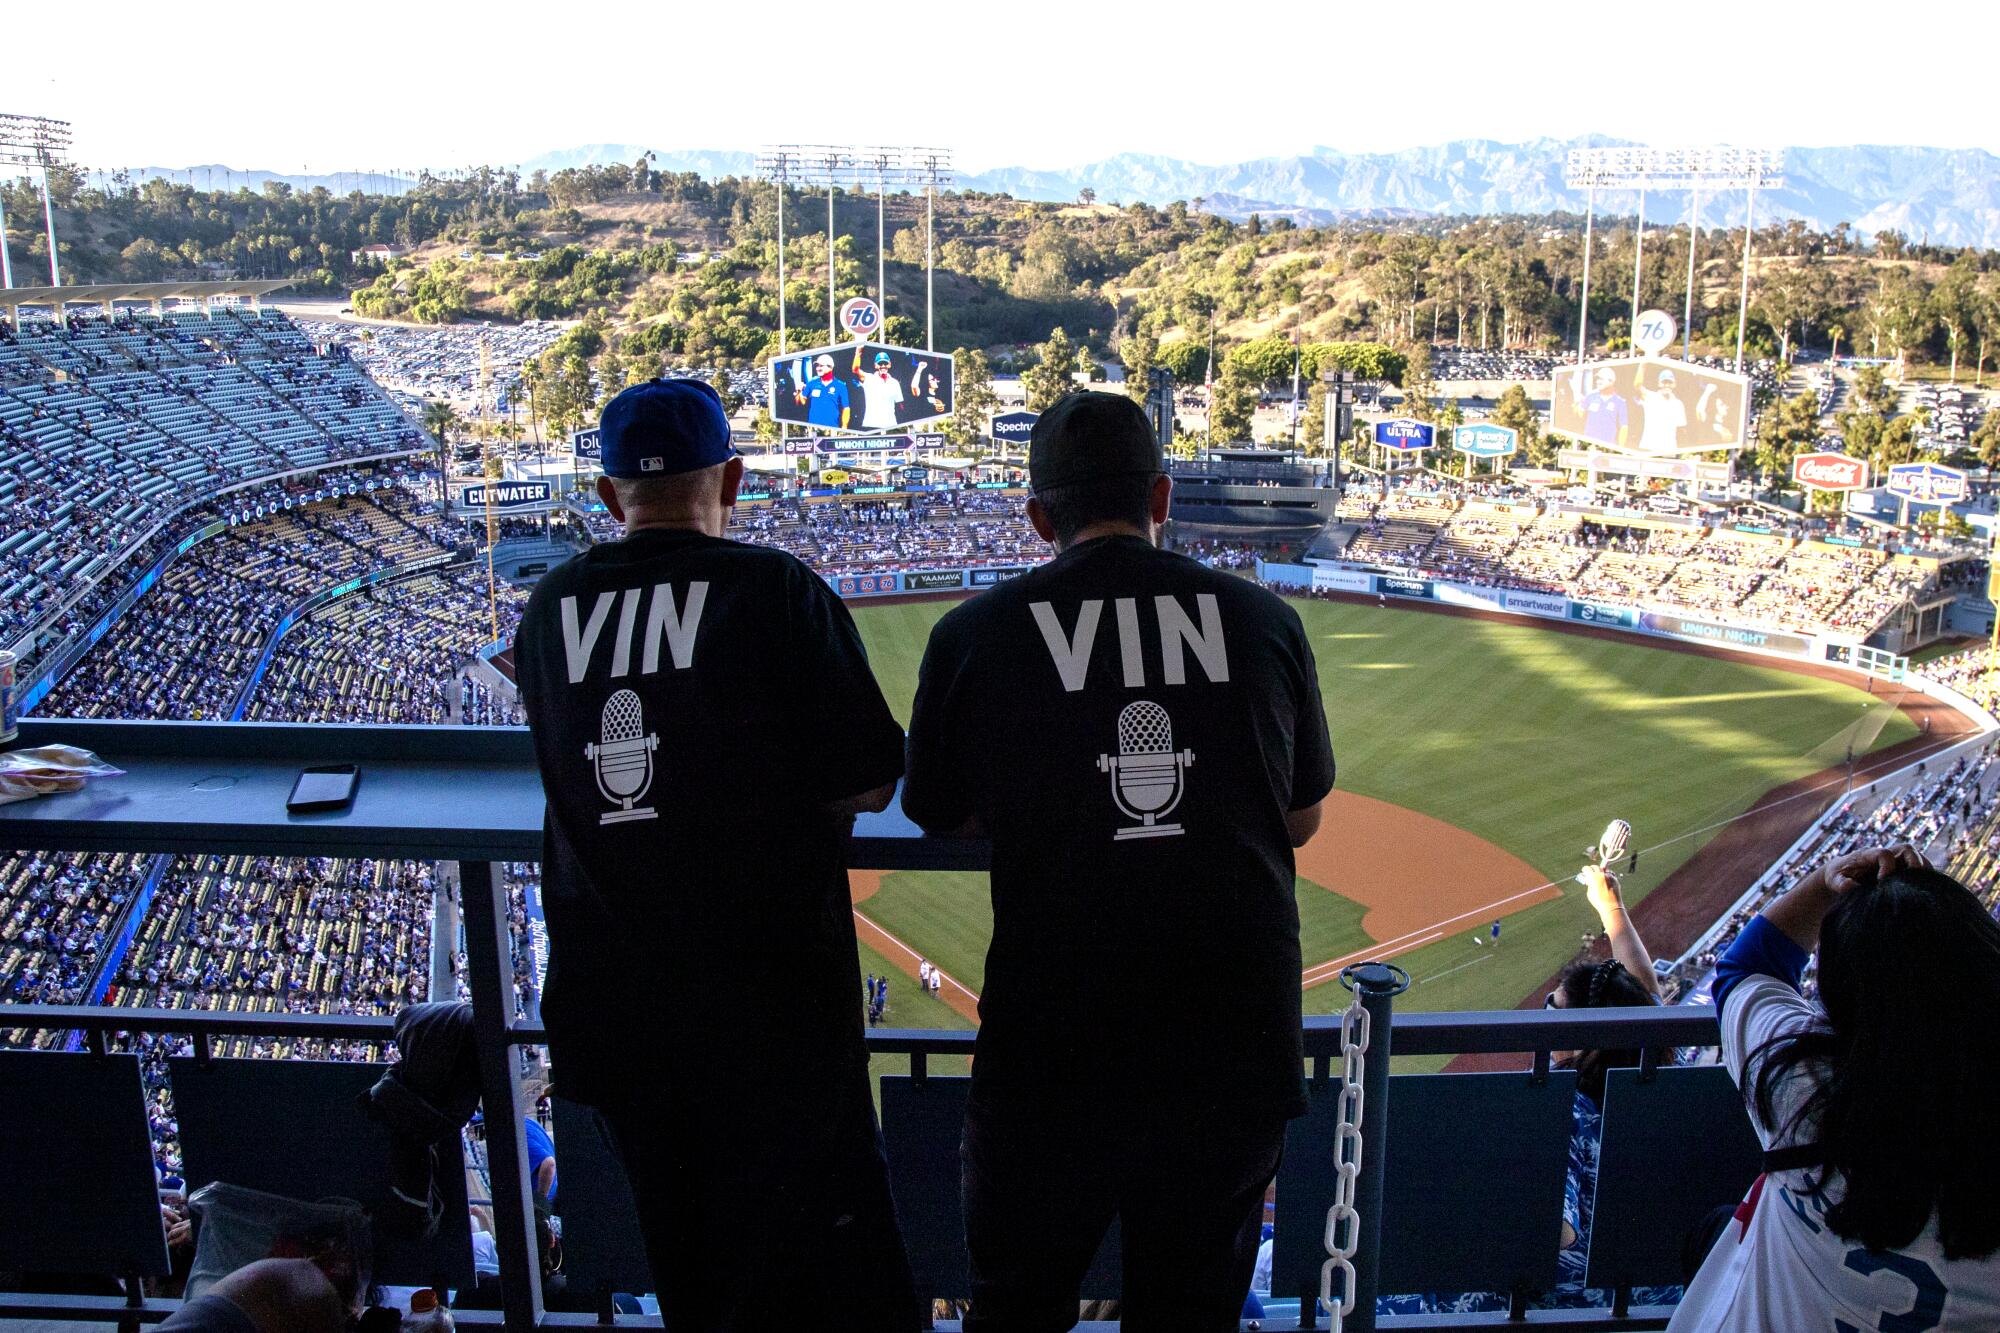 Dodger fans wear T-shirts in honor of late Dodgers announcer Vin Scully before the game at Dodger Stadium.